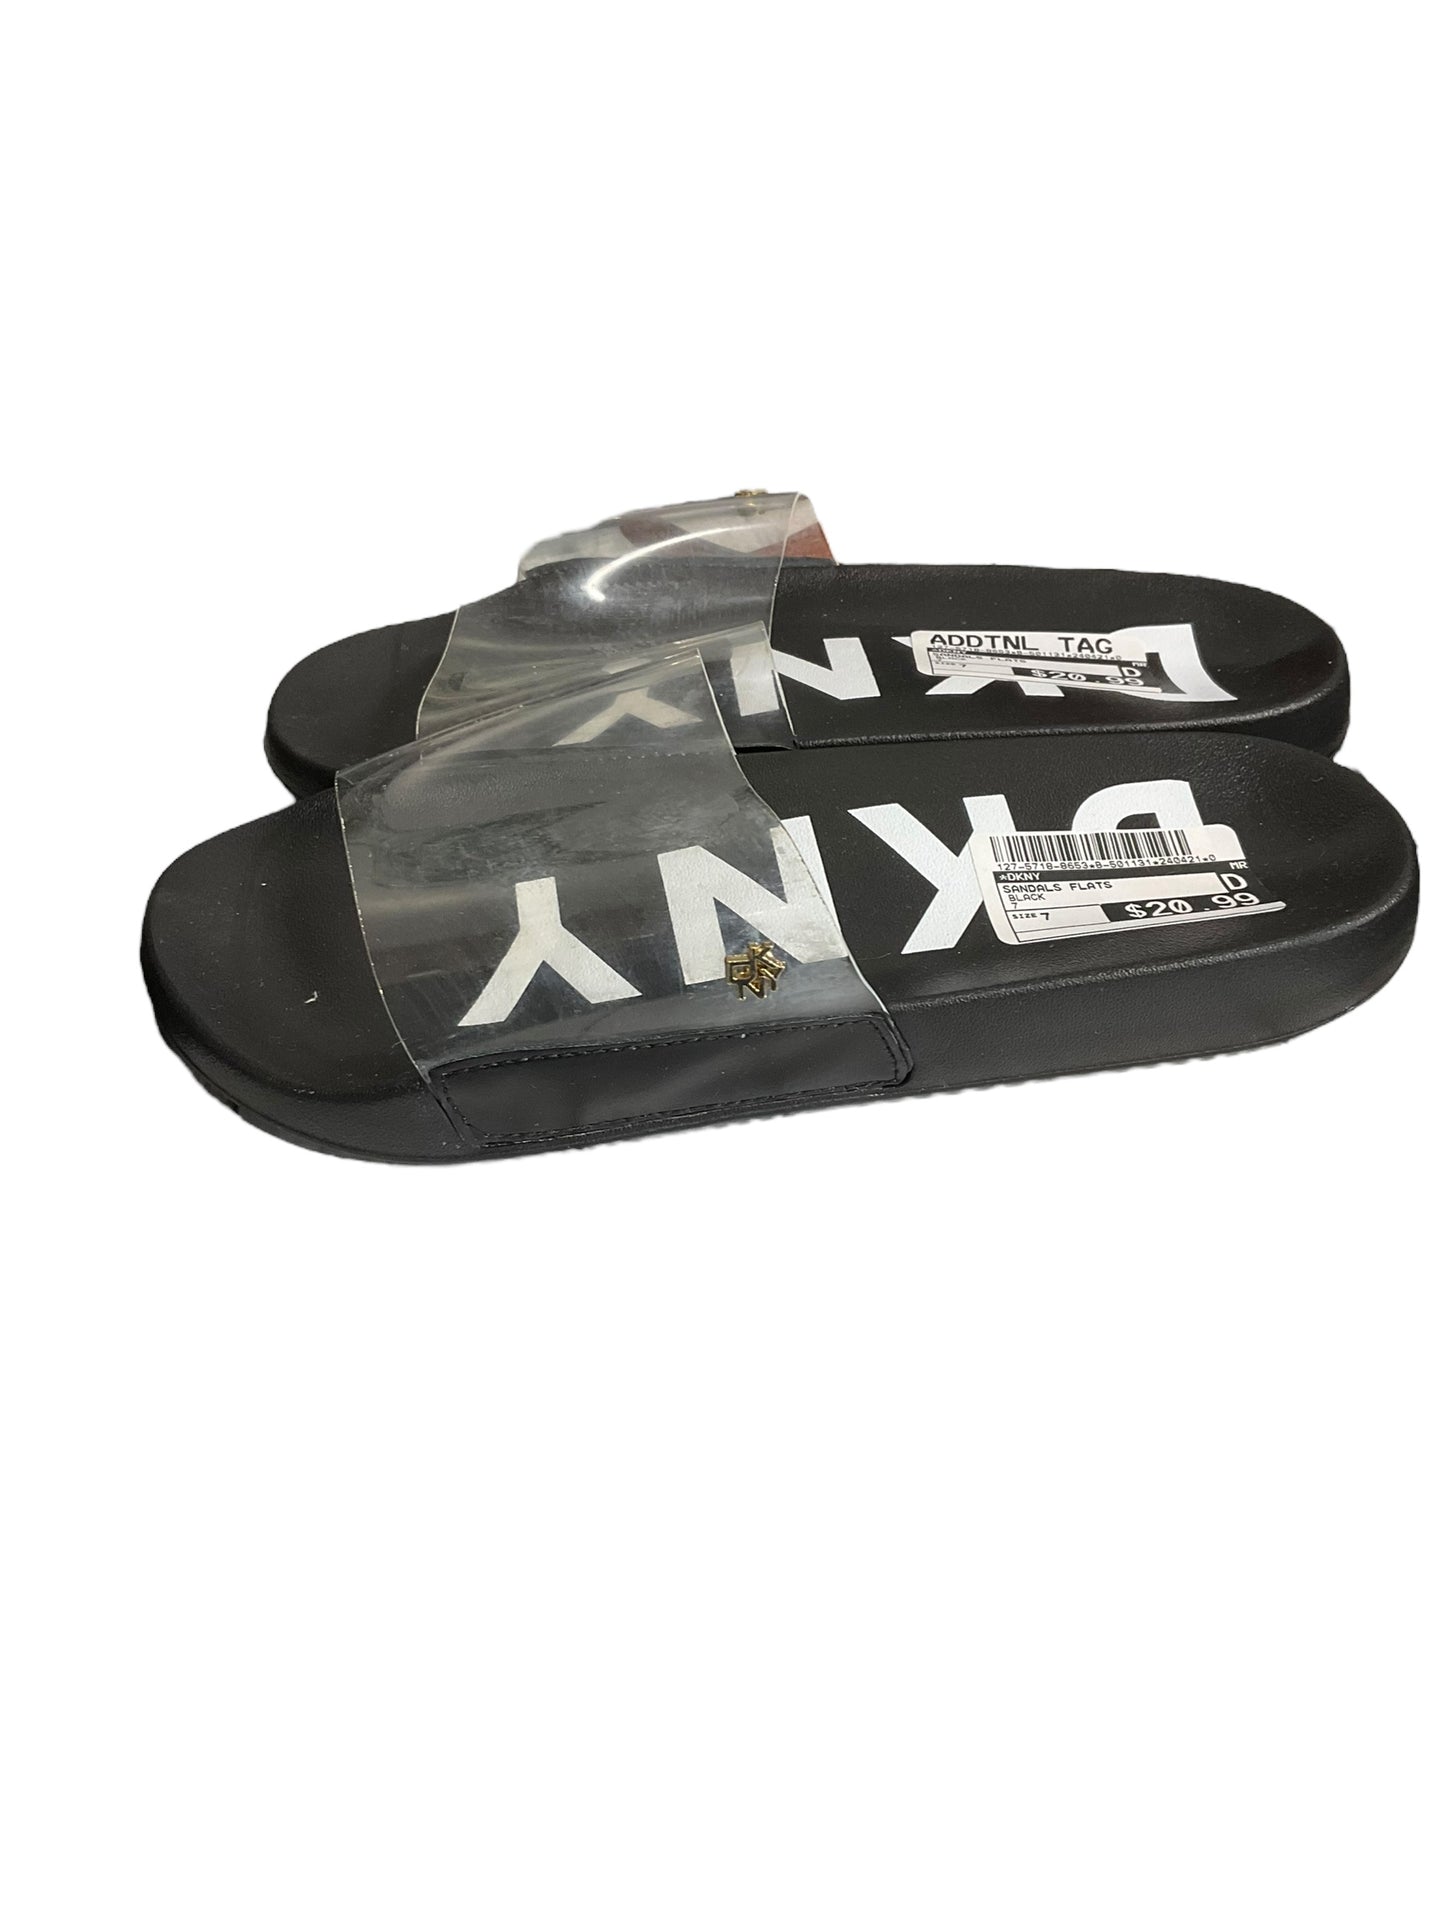 Sandals Flats By Dkny  Size: 7